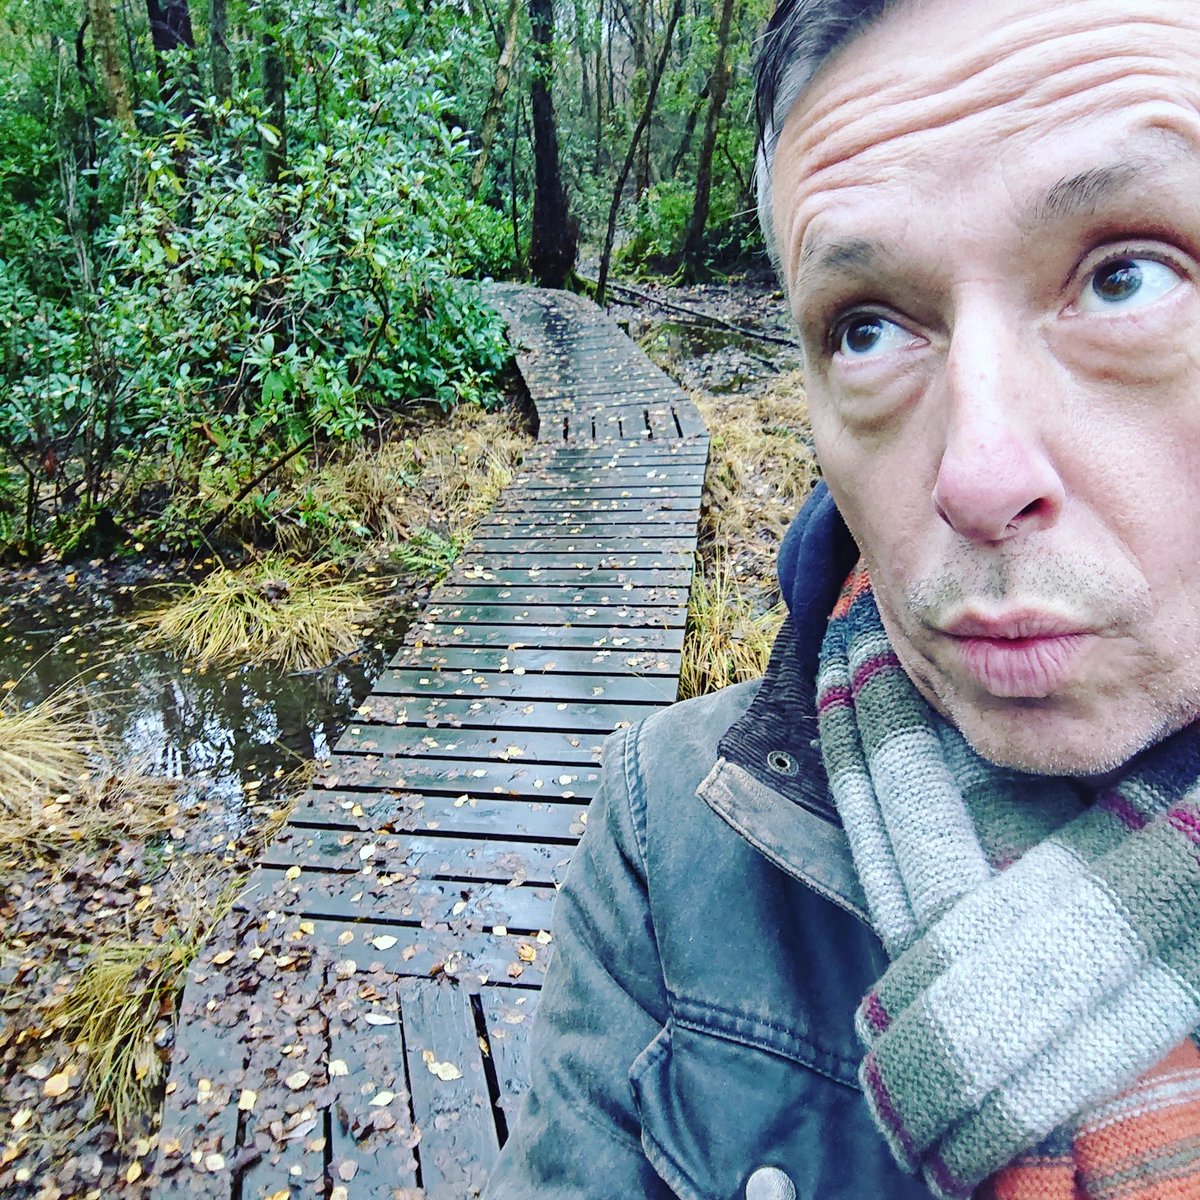 DO NOT lead me up the garden path... On #wheresandy today Wrong answers only remember. GO!